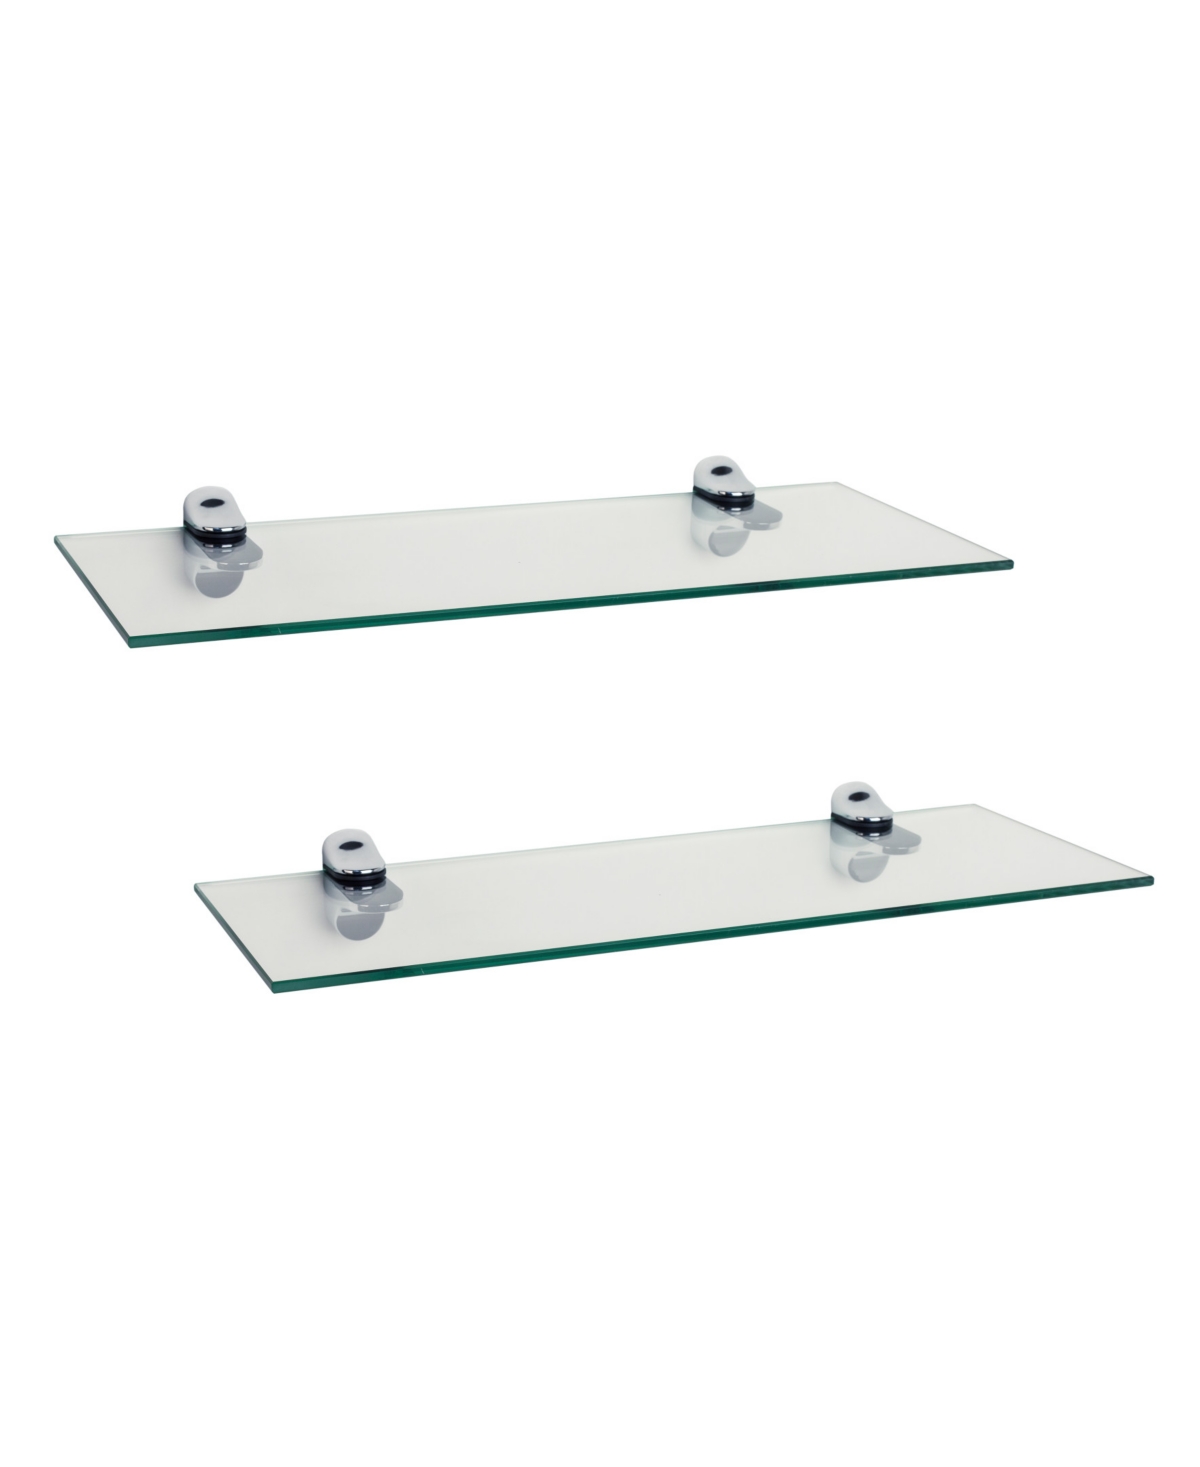 Set of 2 Glass Floating Shelves with Chrome Brackets 16" x 6" - Clear